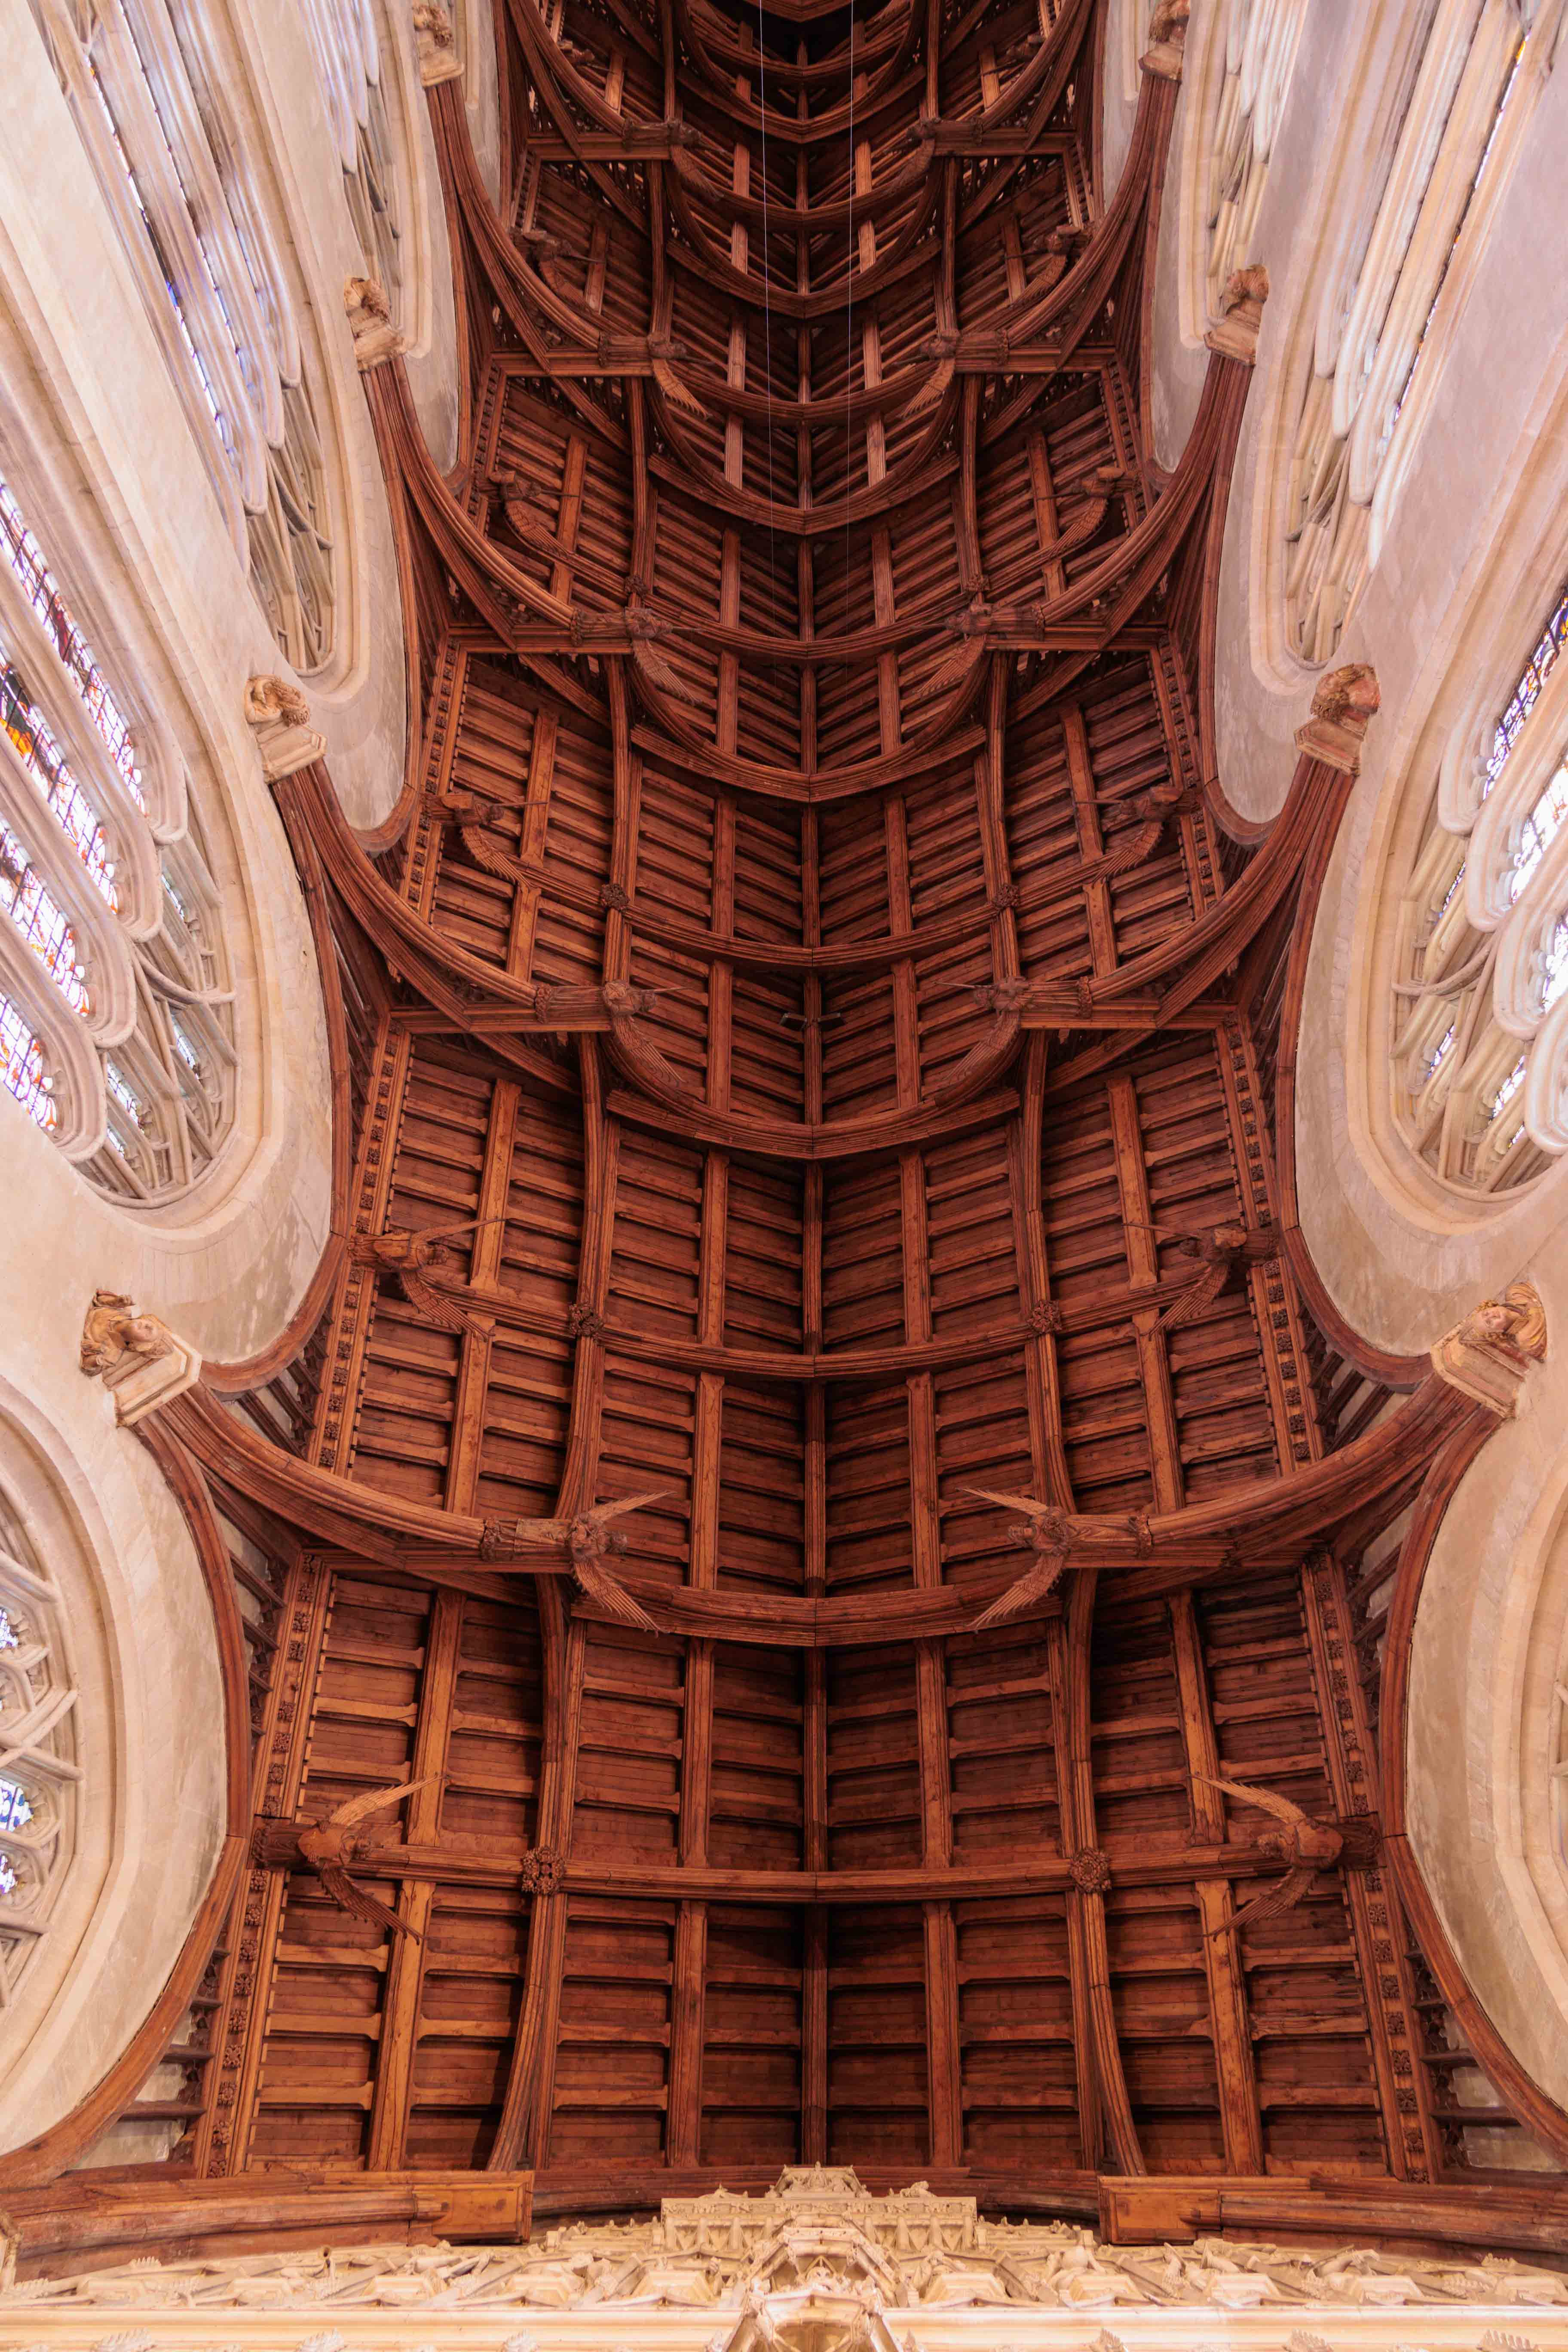 Chapel ceiling and reredos